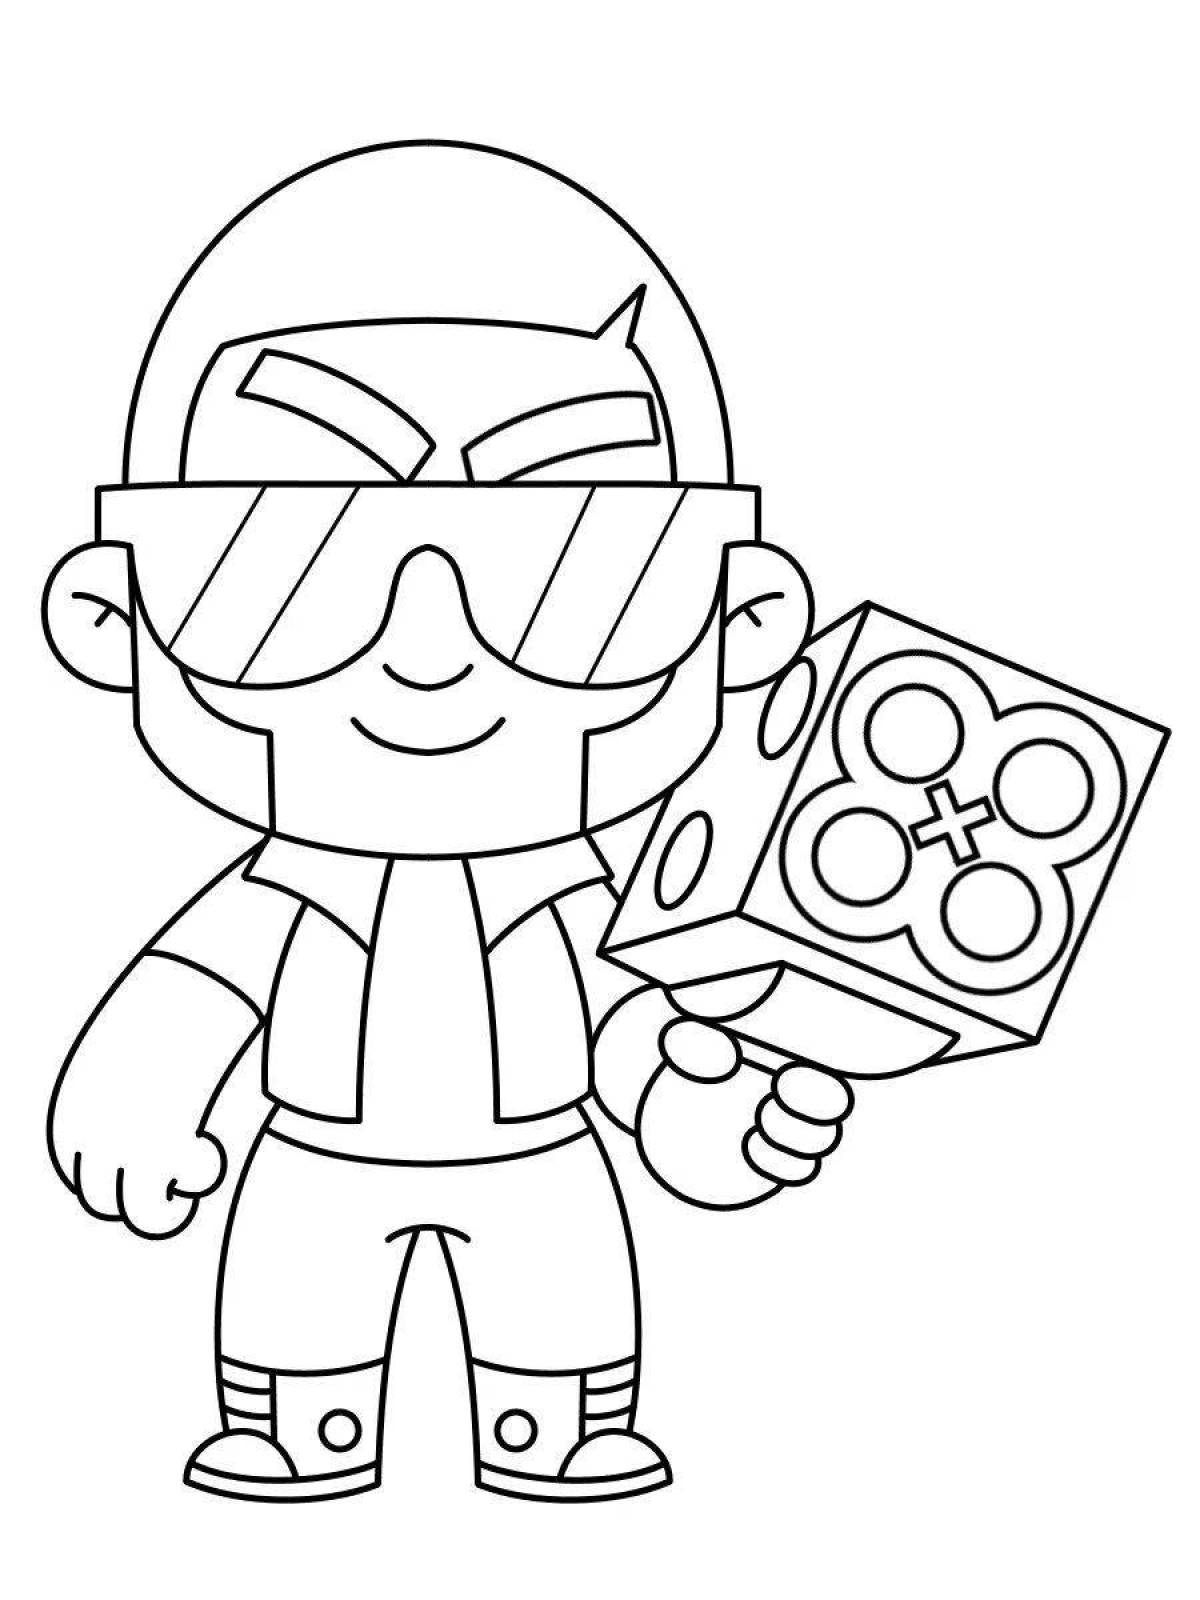 Cute leon coloring book for boys